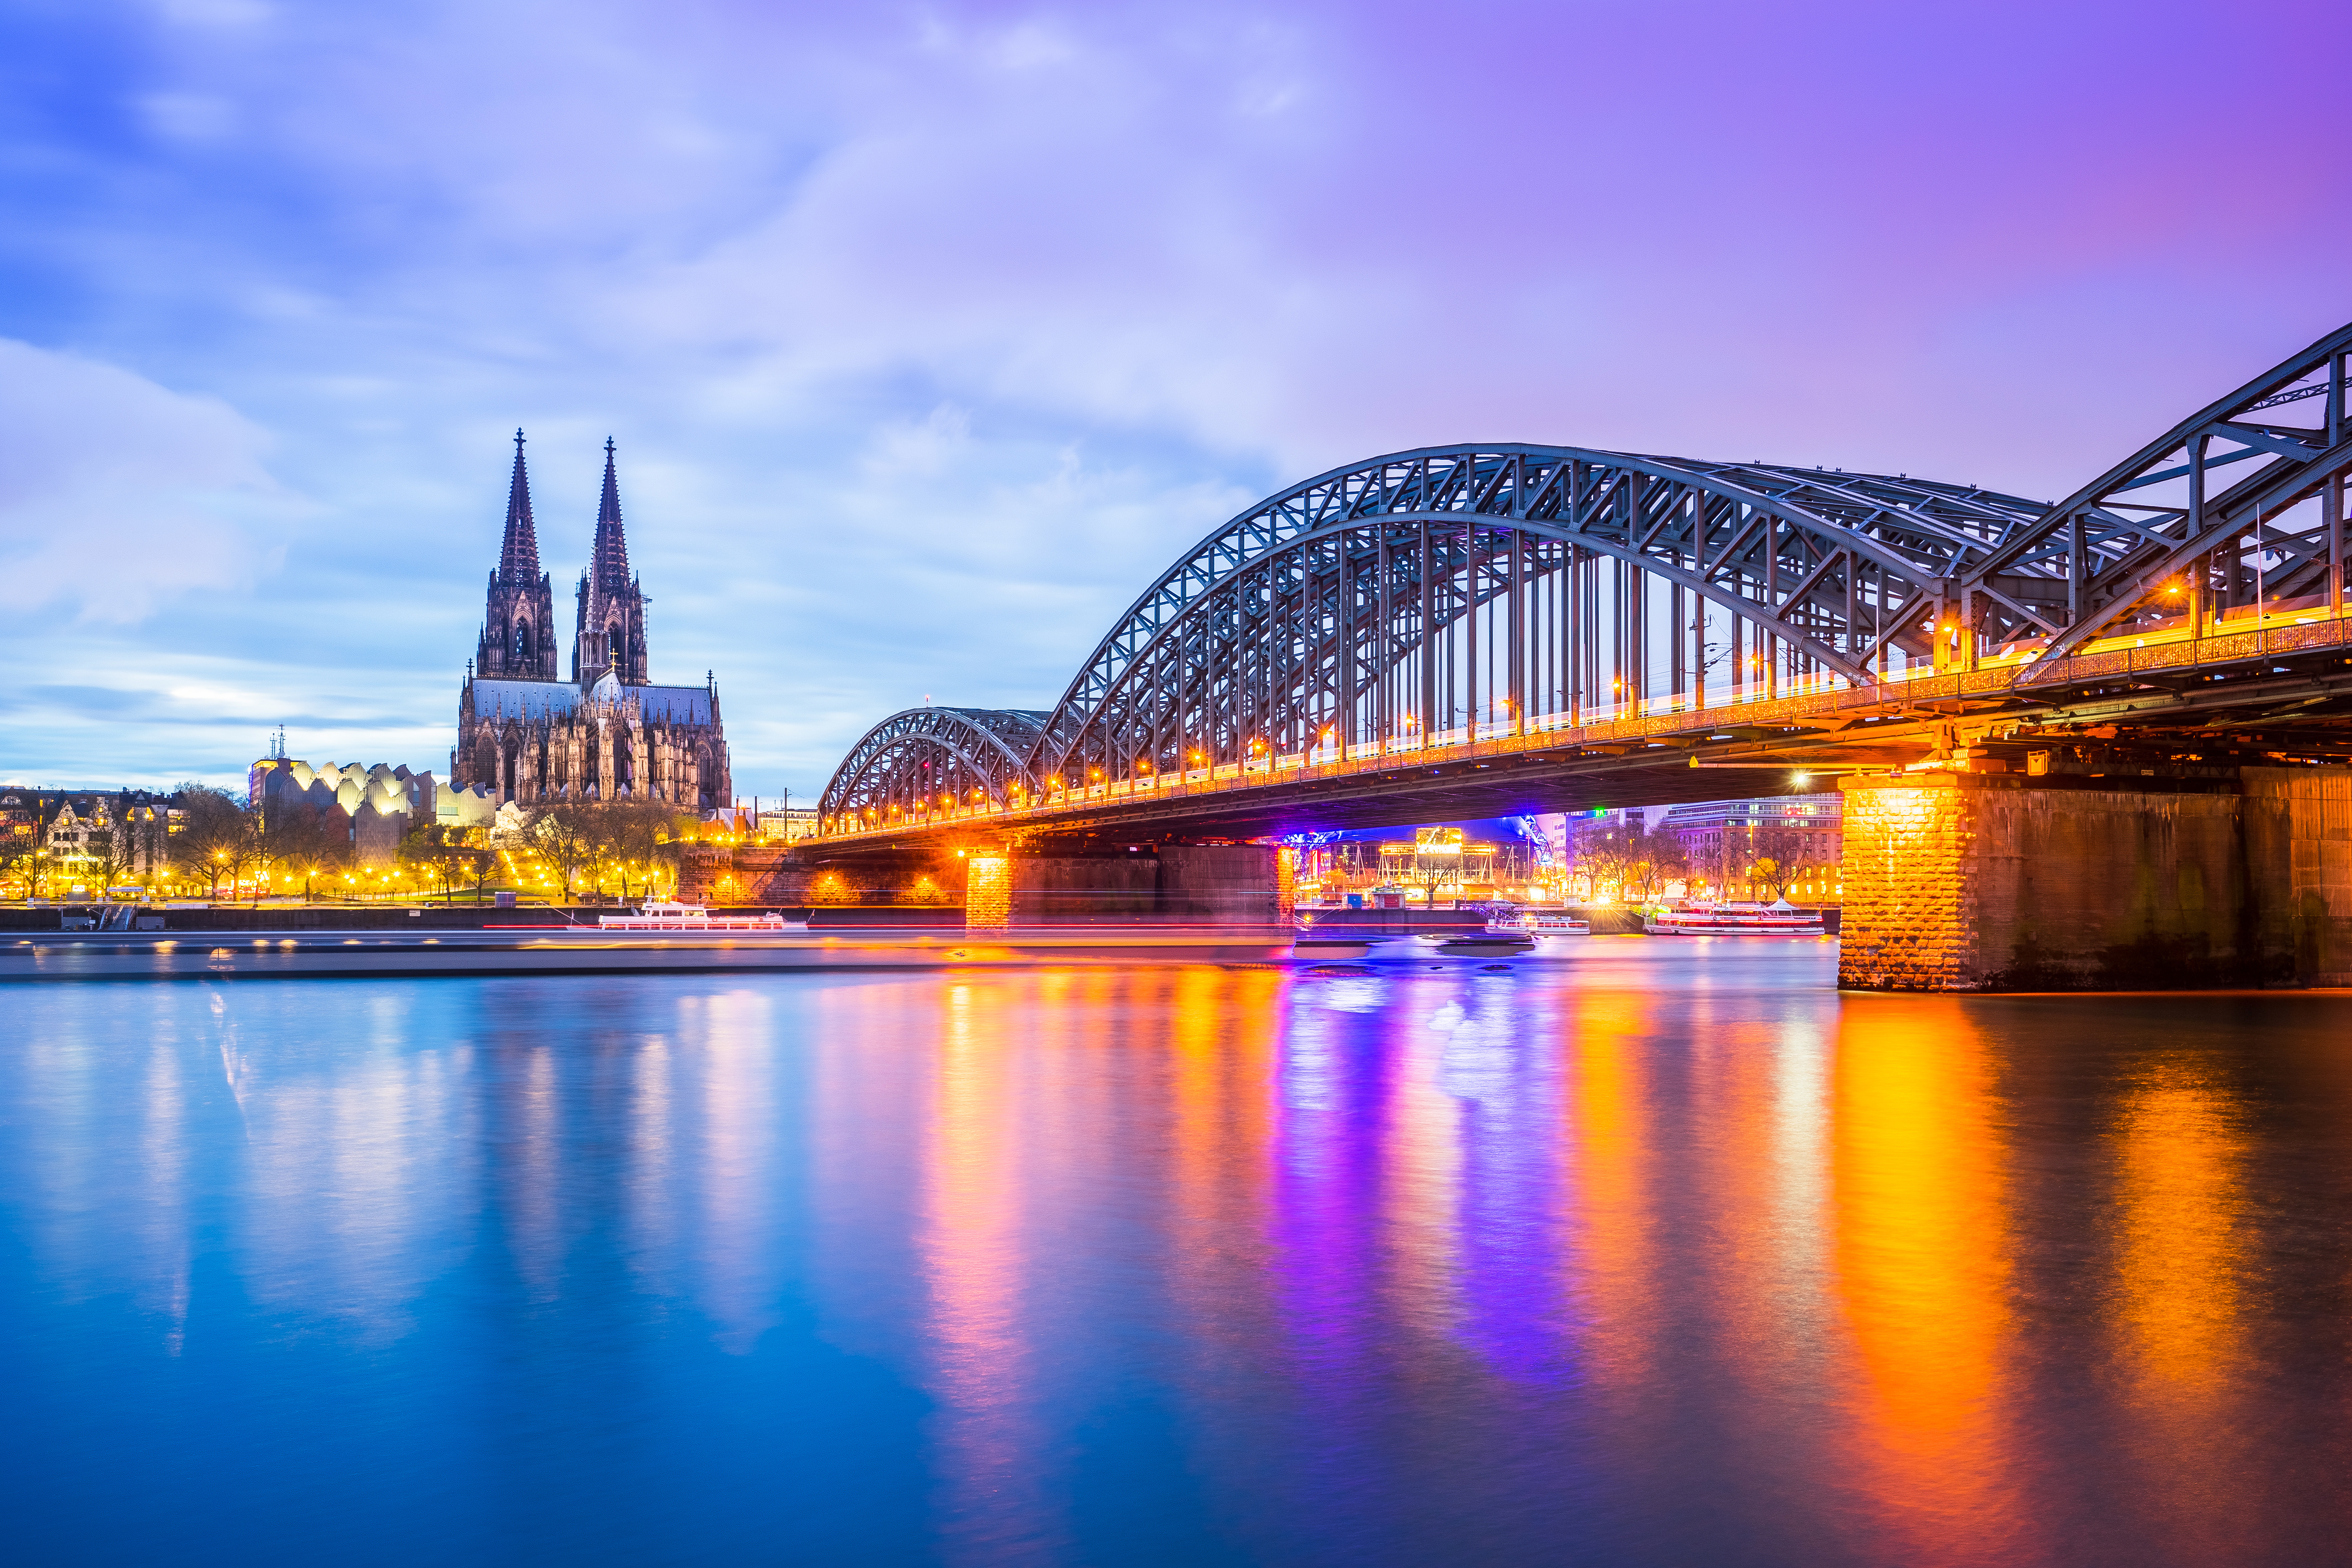 Cologne skyline at dusk, with the Rhine and Hohenzollern Bridge in the foreground and Cologne Cathedral in the background